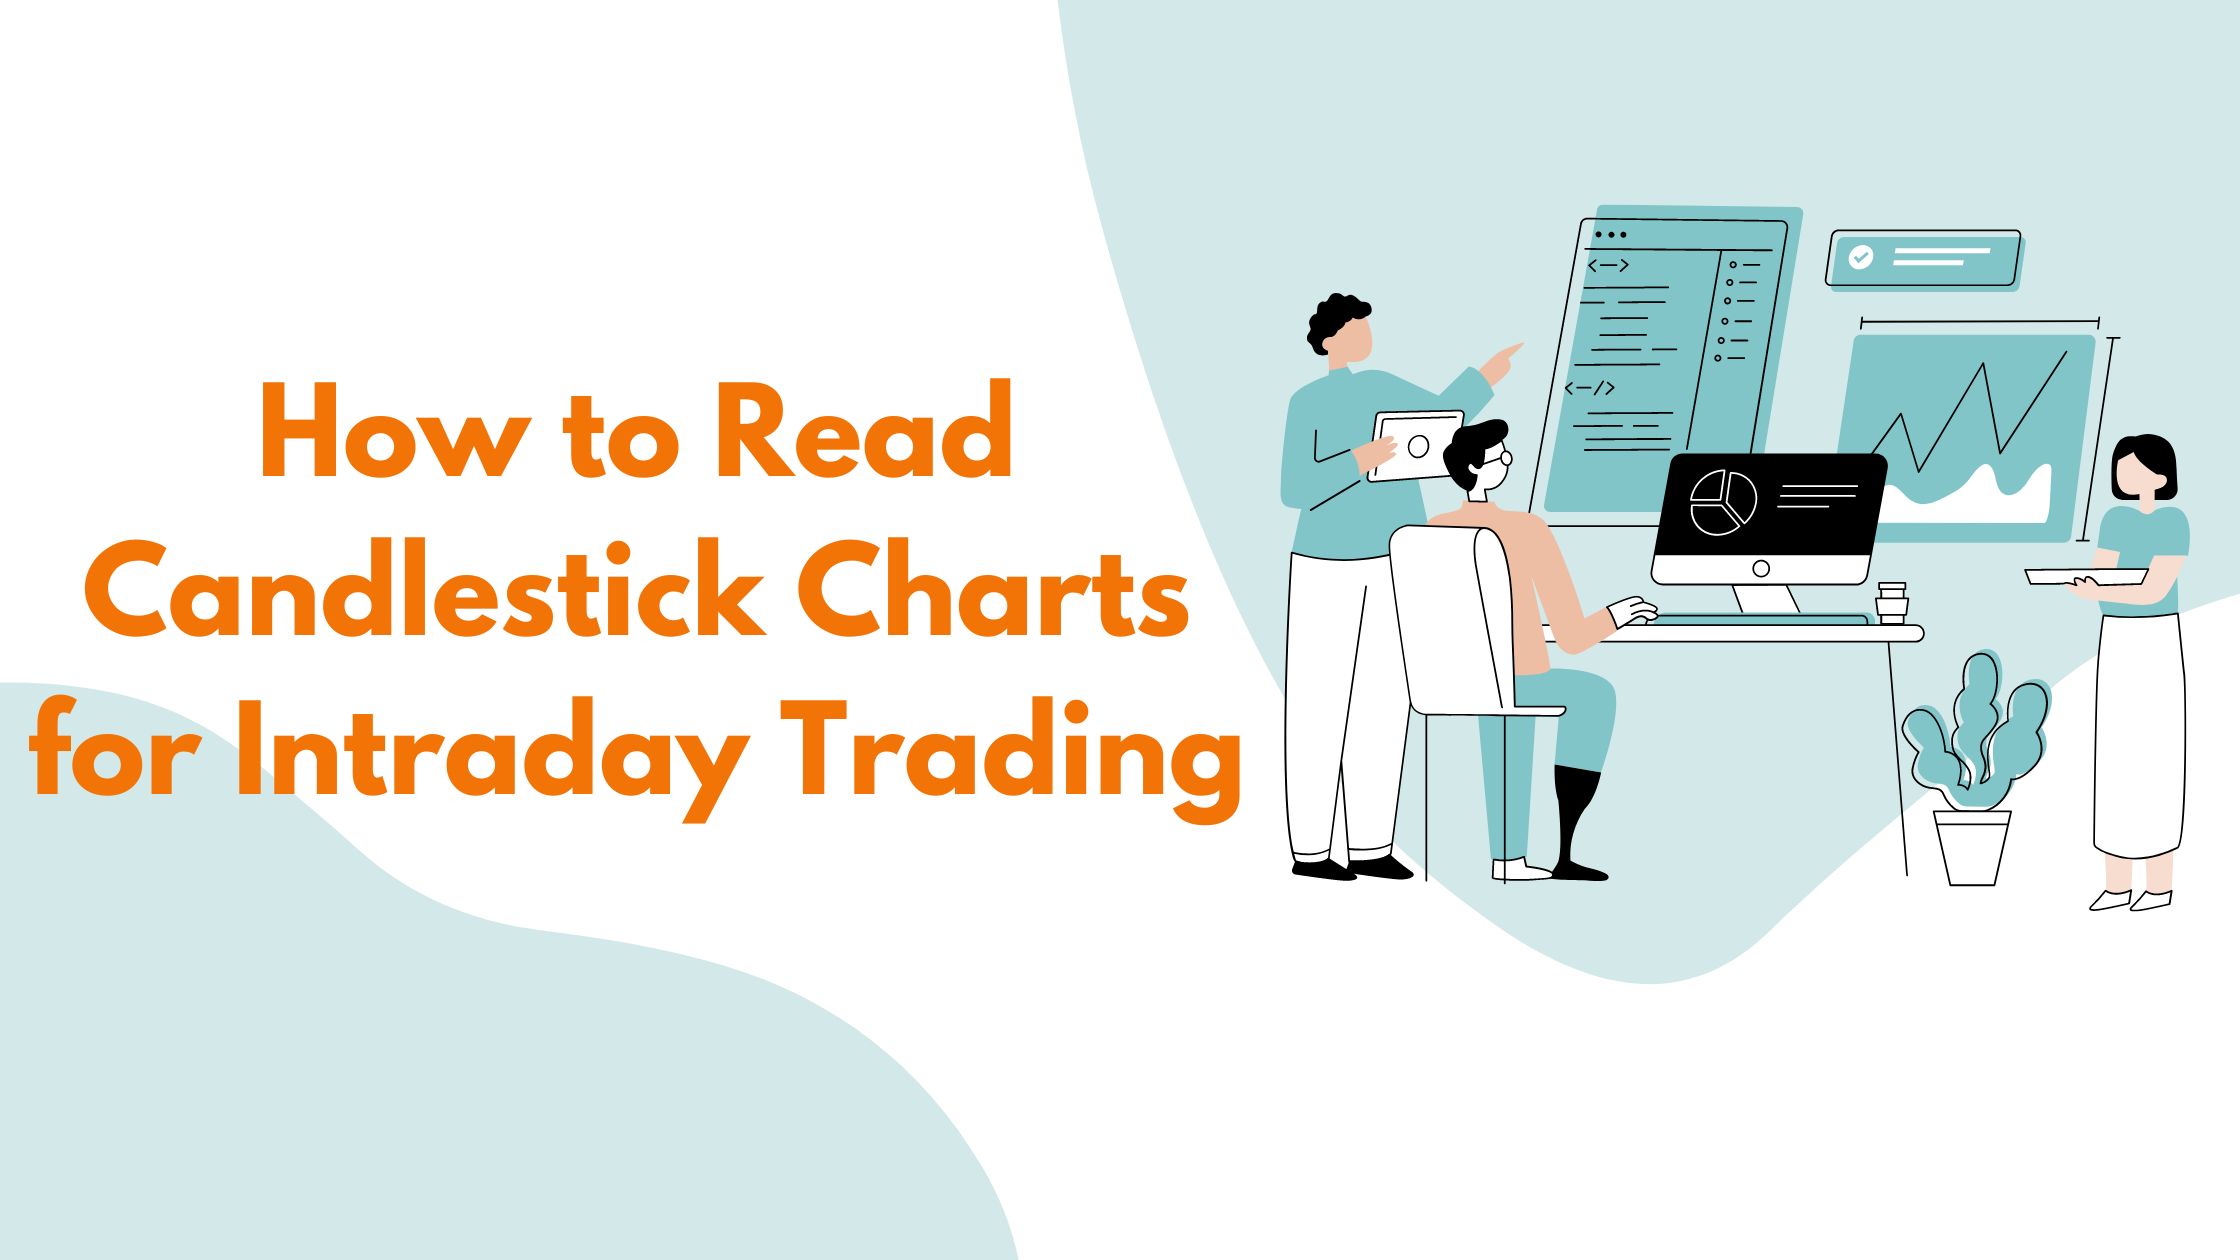 How to Read Candlestick Charts for Intraday Trading